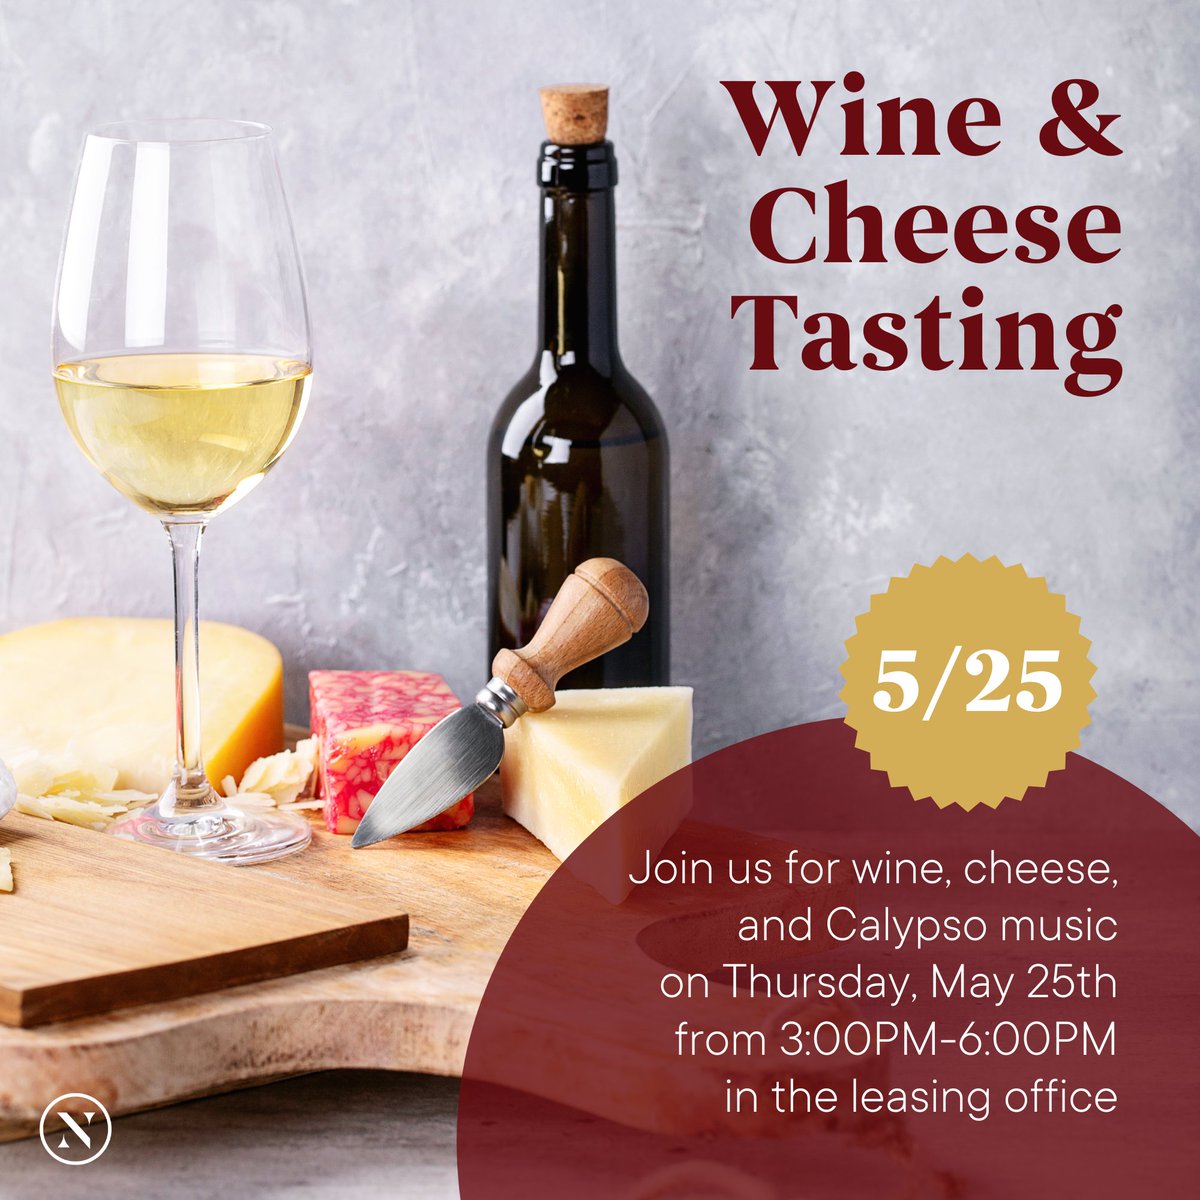 Wine & Cheese Tasting at The Brittany - This Thirstday at 3 PM!

#WeLoveOurResidents #LoveWhereYouLive #Indialantic #LuxuryRentals #WineandCheeseTasting #Community #TheBrittany #Thirstday